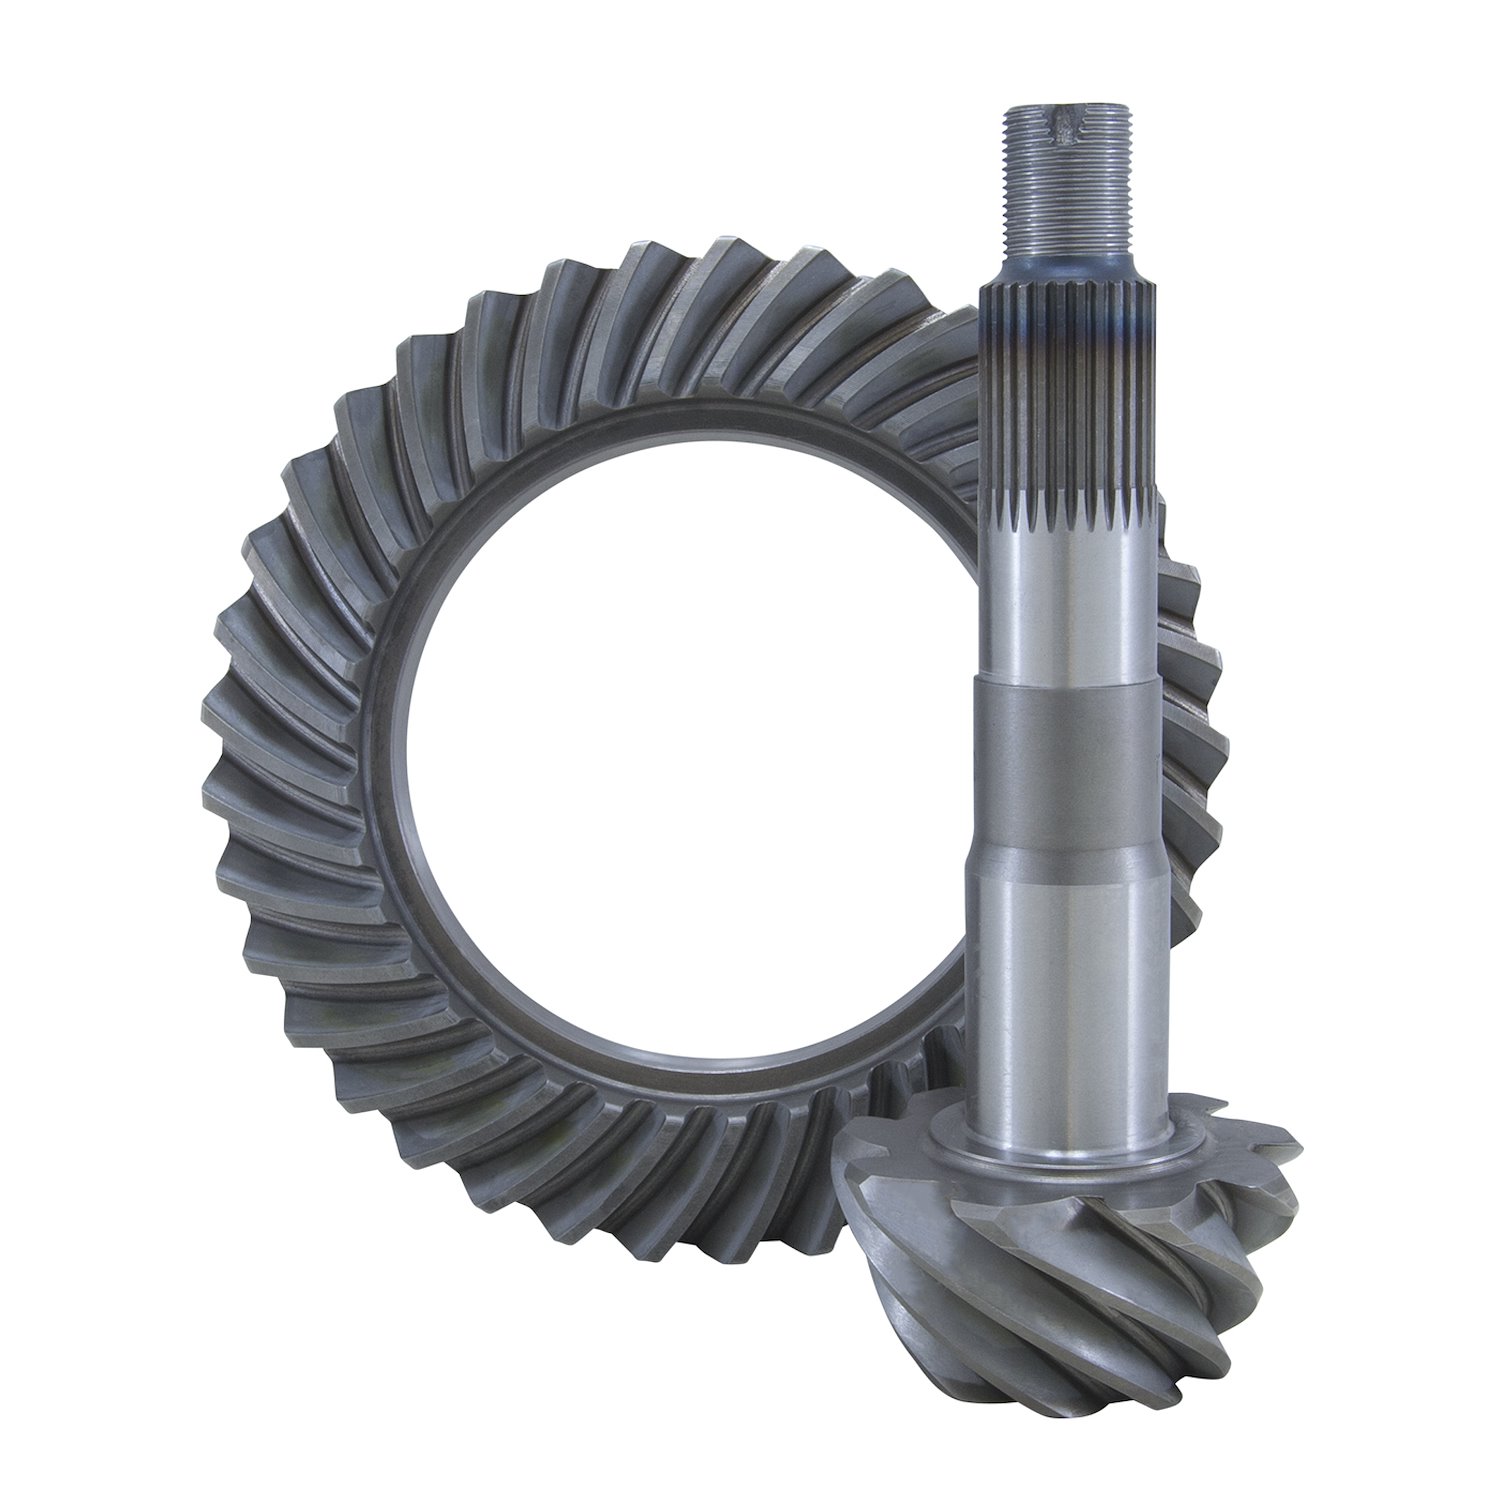 High Performance Ring & Pinion Gear Set For Toyota V6 In A 4.30 Ratio